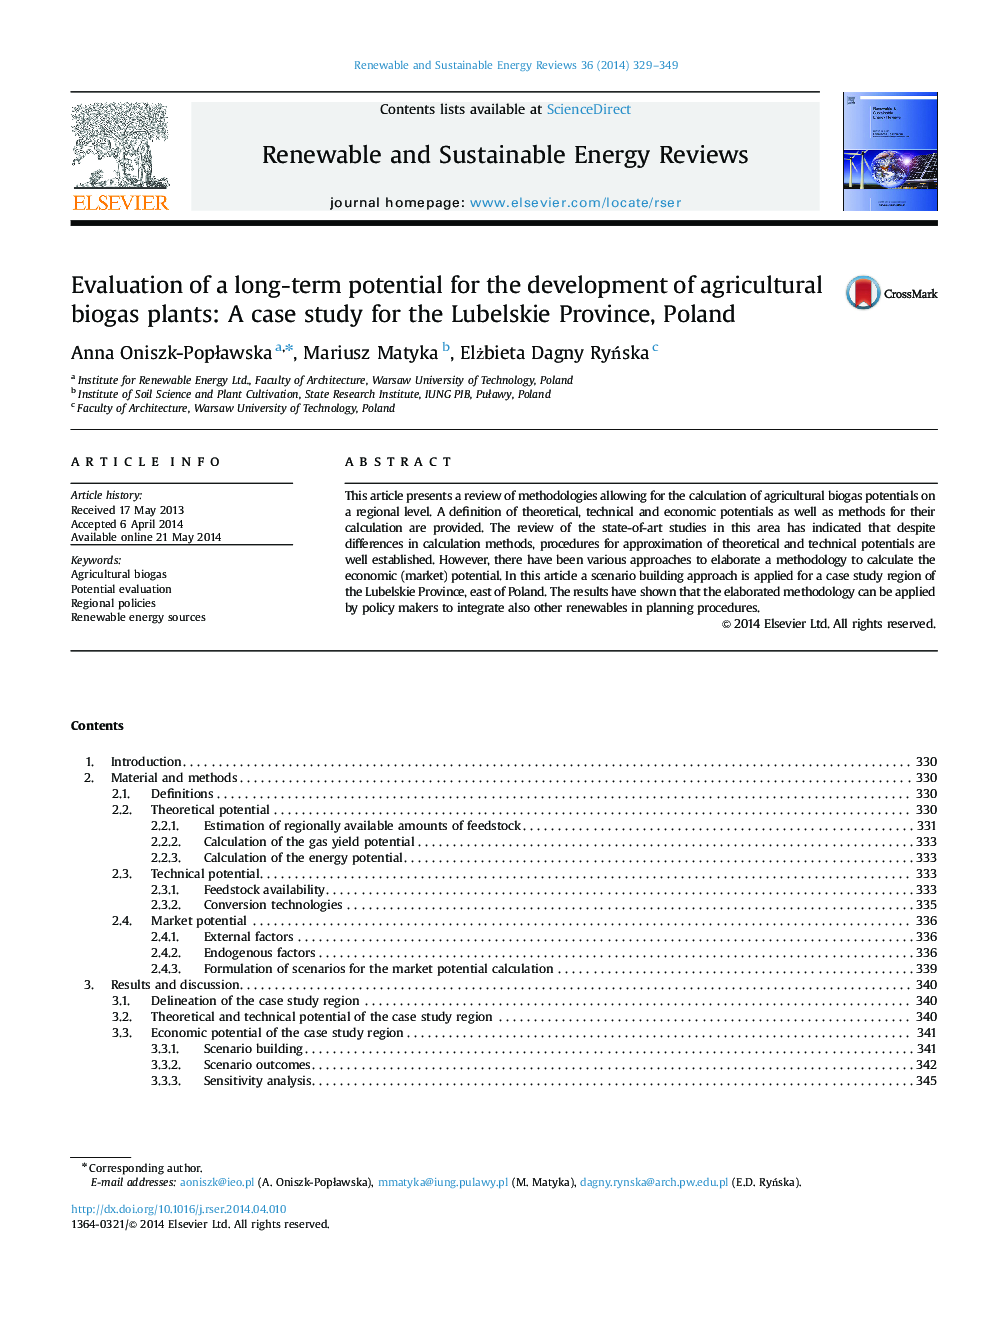 Evaluation of a long-term potential for the development of agricultural biogas plants: A case study for the Lubelskie Province, Poland